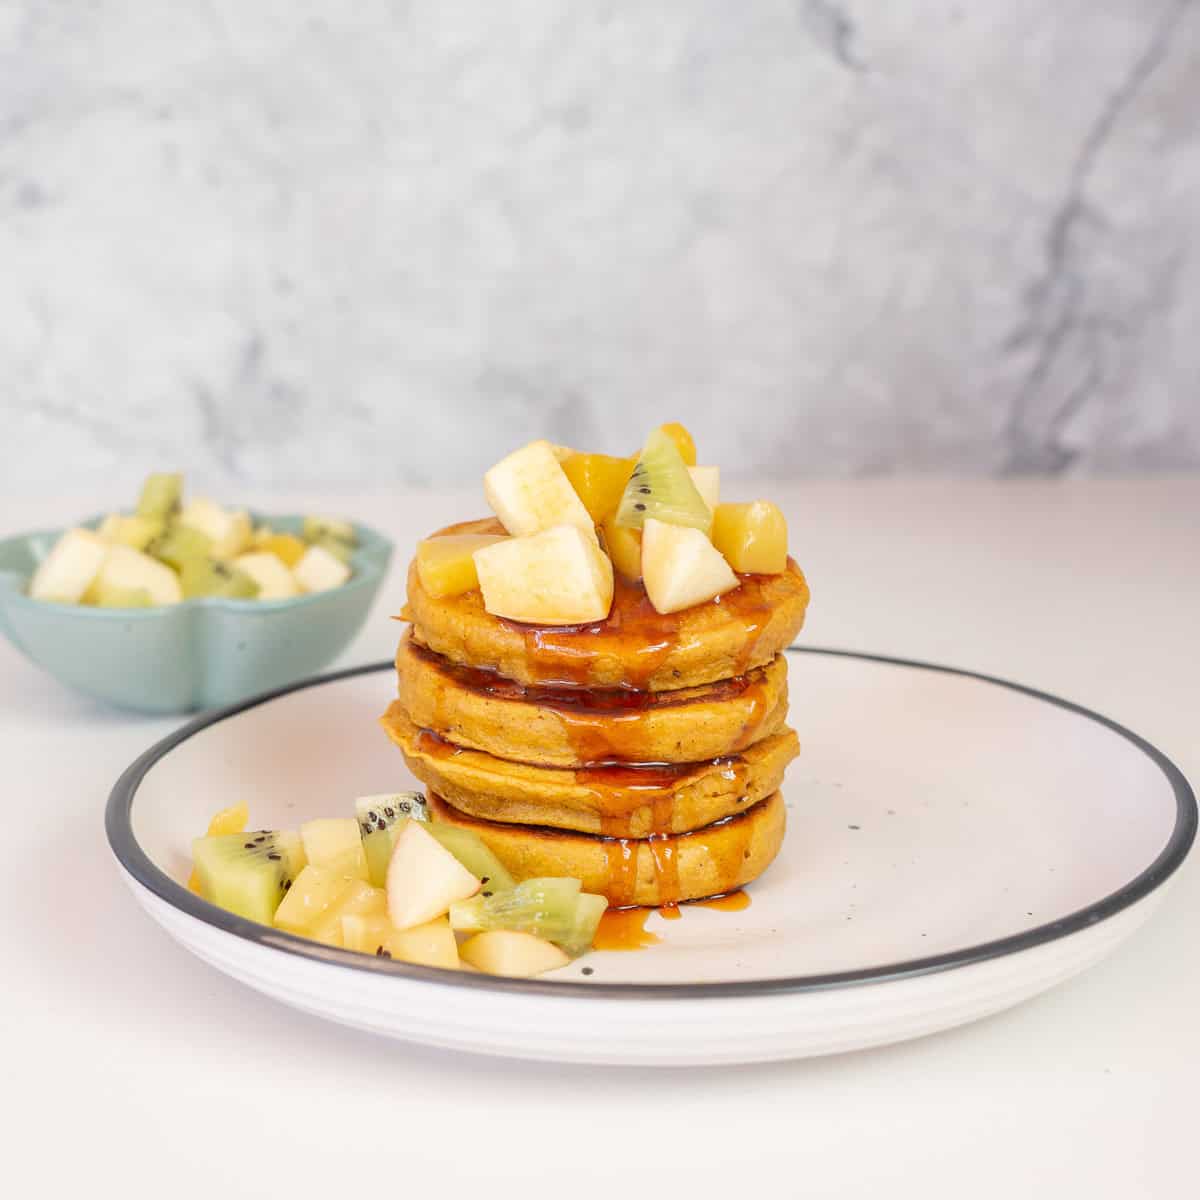 A stack of 5 orange coloured pancakes on a plate topped with fruit salad and drizzled with syrup.